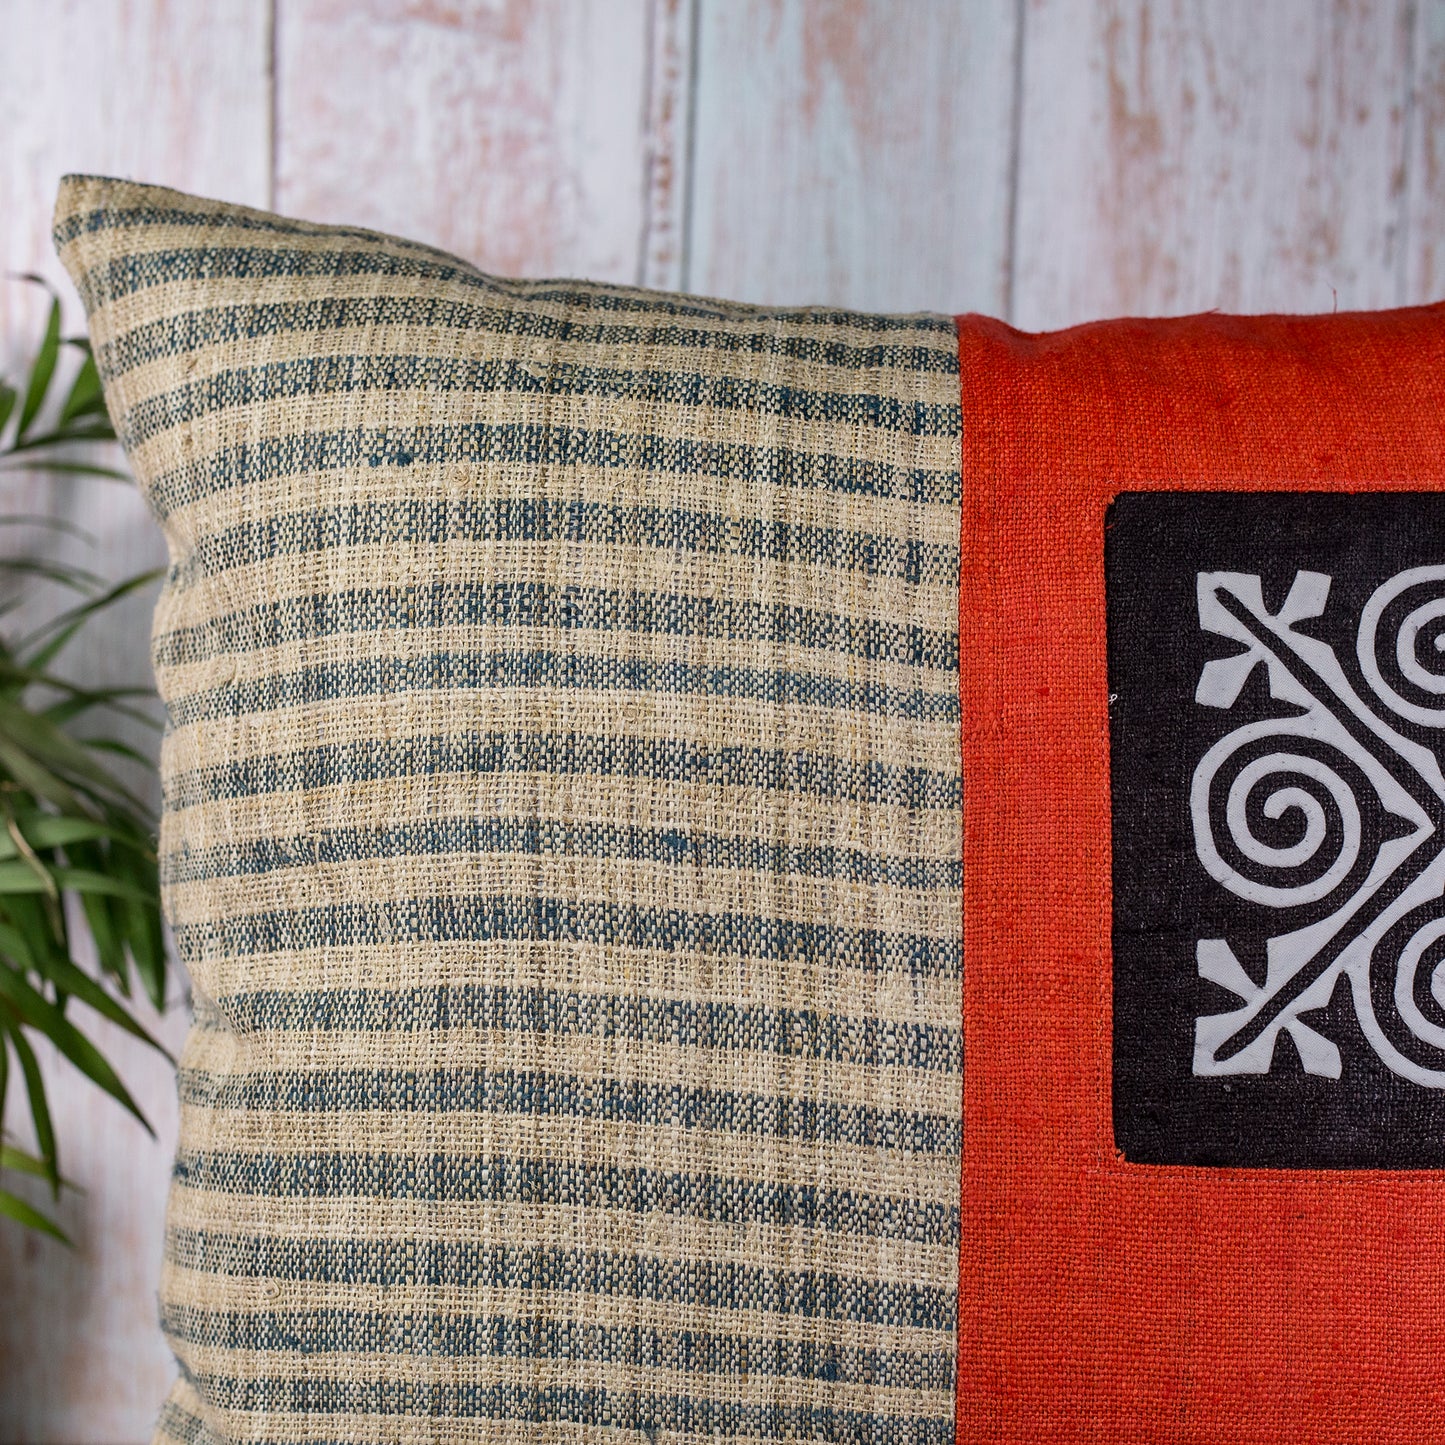 Hemp Cushion Cover in Red - H'mong pattern, handwoven fabric stripes, handmade 100%